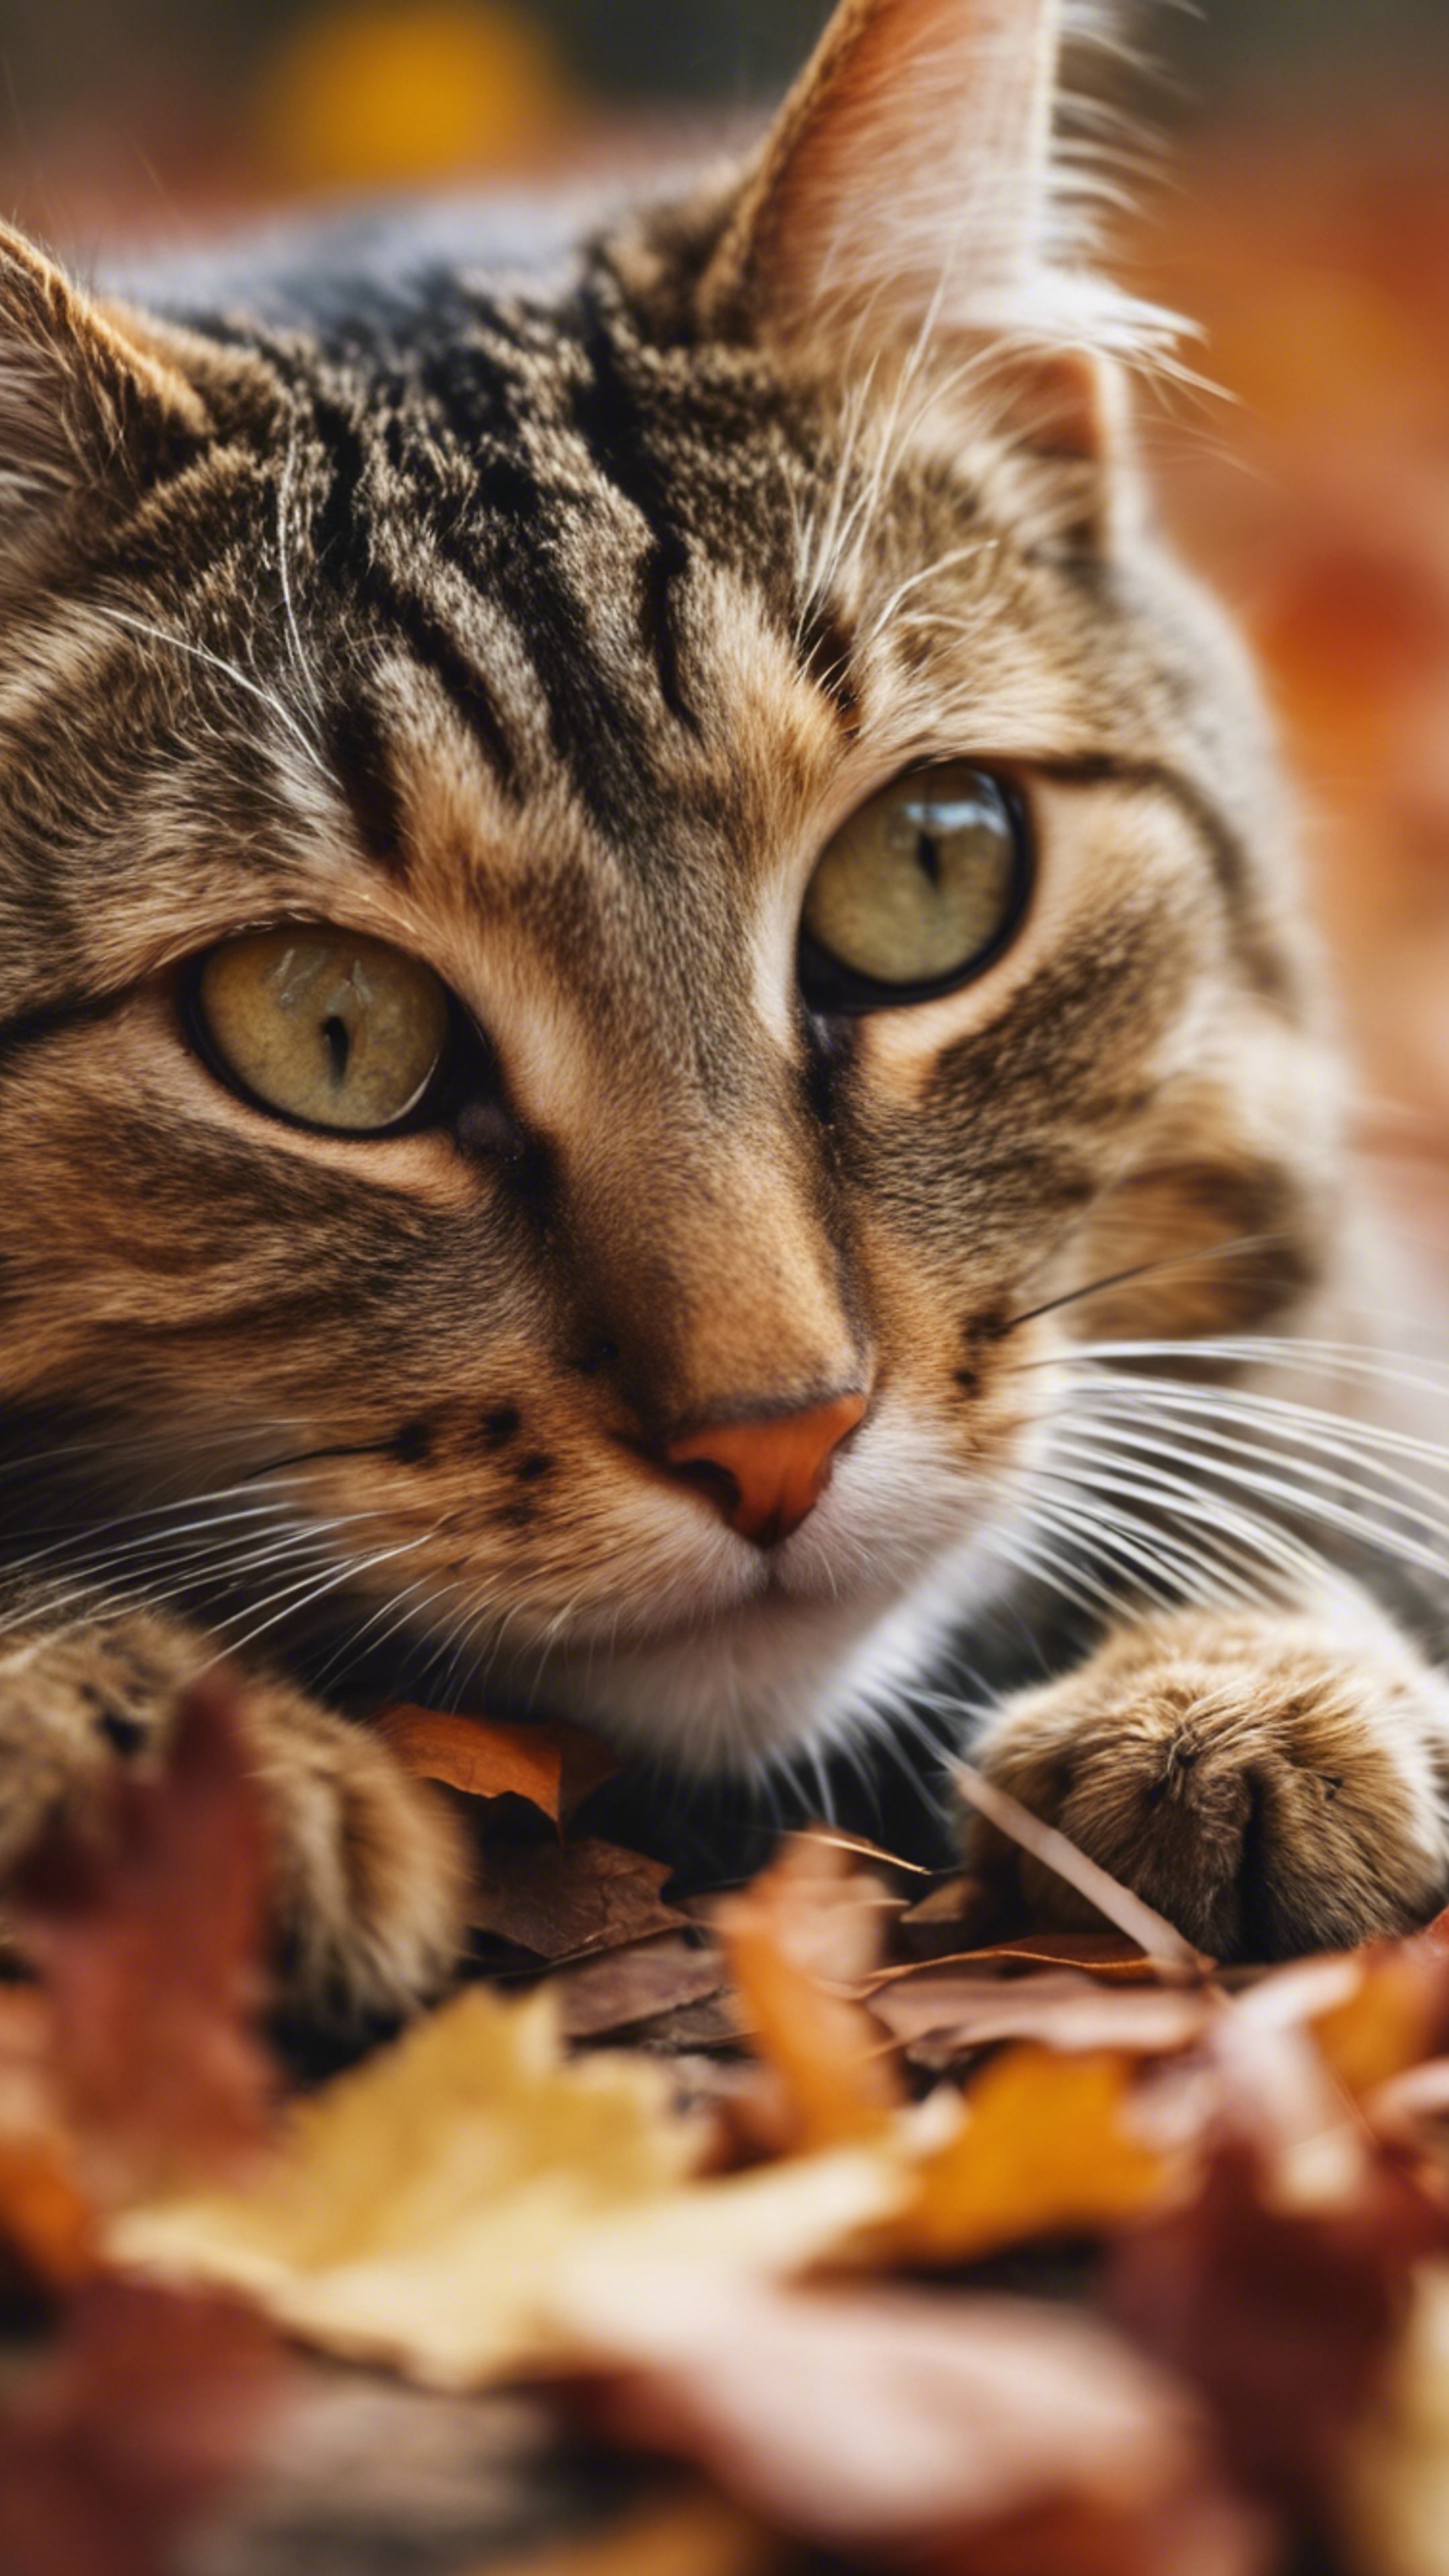 A falling leaf crunches under the paw of an inquisitive tabby cat in the colours of autumn. วอลล์เปเปอร์[5f8125a5764f4e8ca44e]